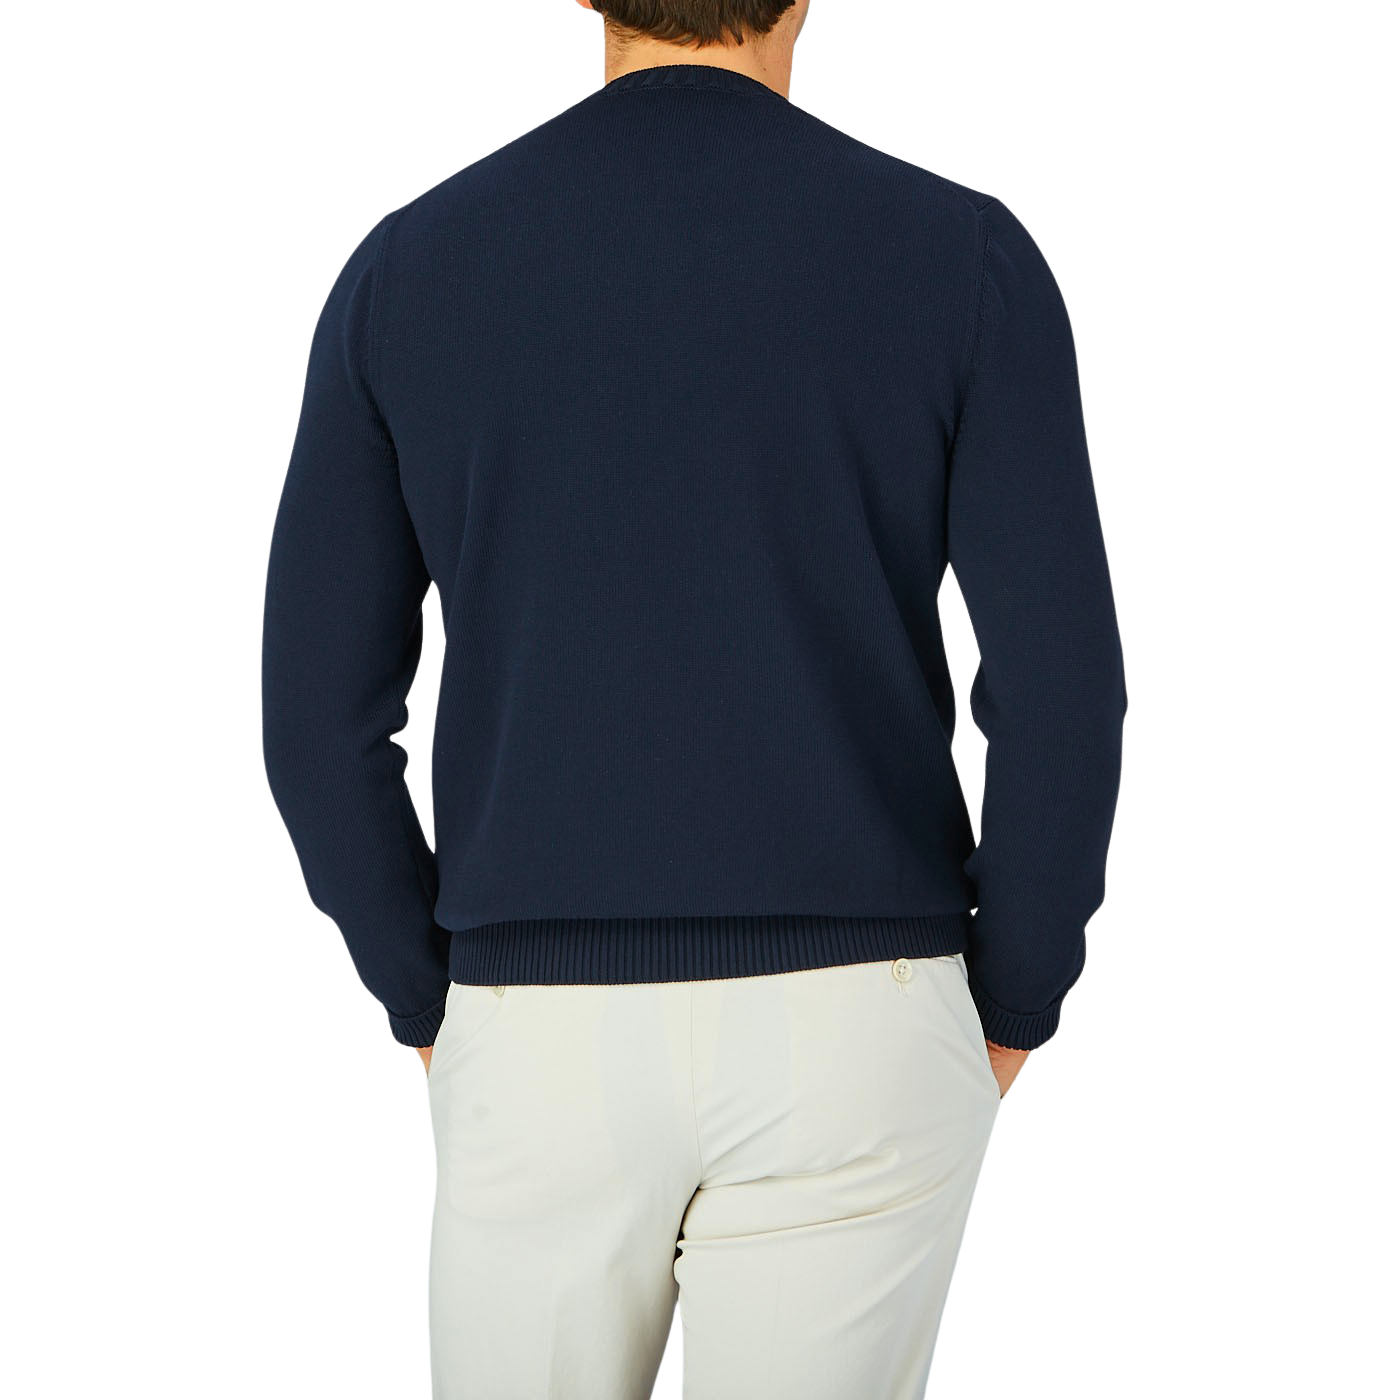 The back view of a man wearing a Gran Sasso Navy Blue Egyptian Cotton Crewneck Sweater.